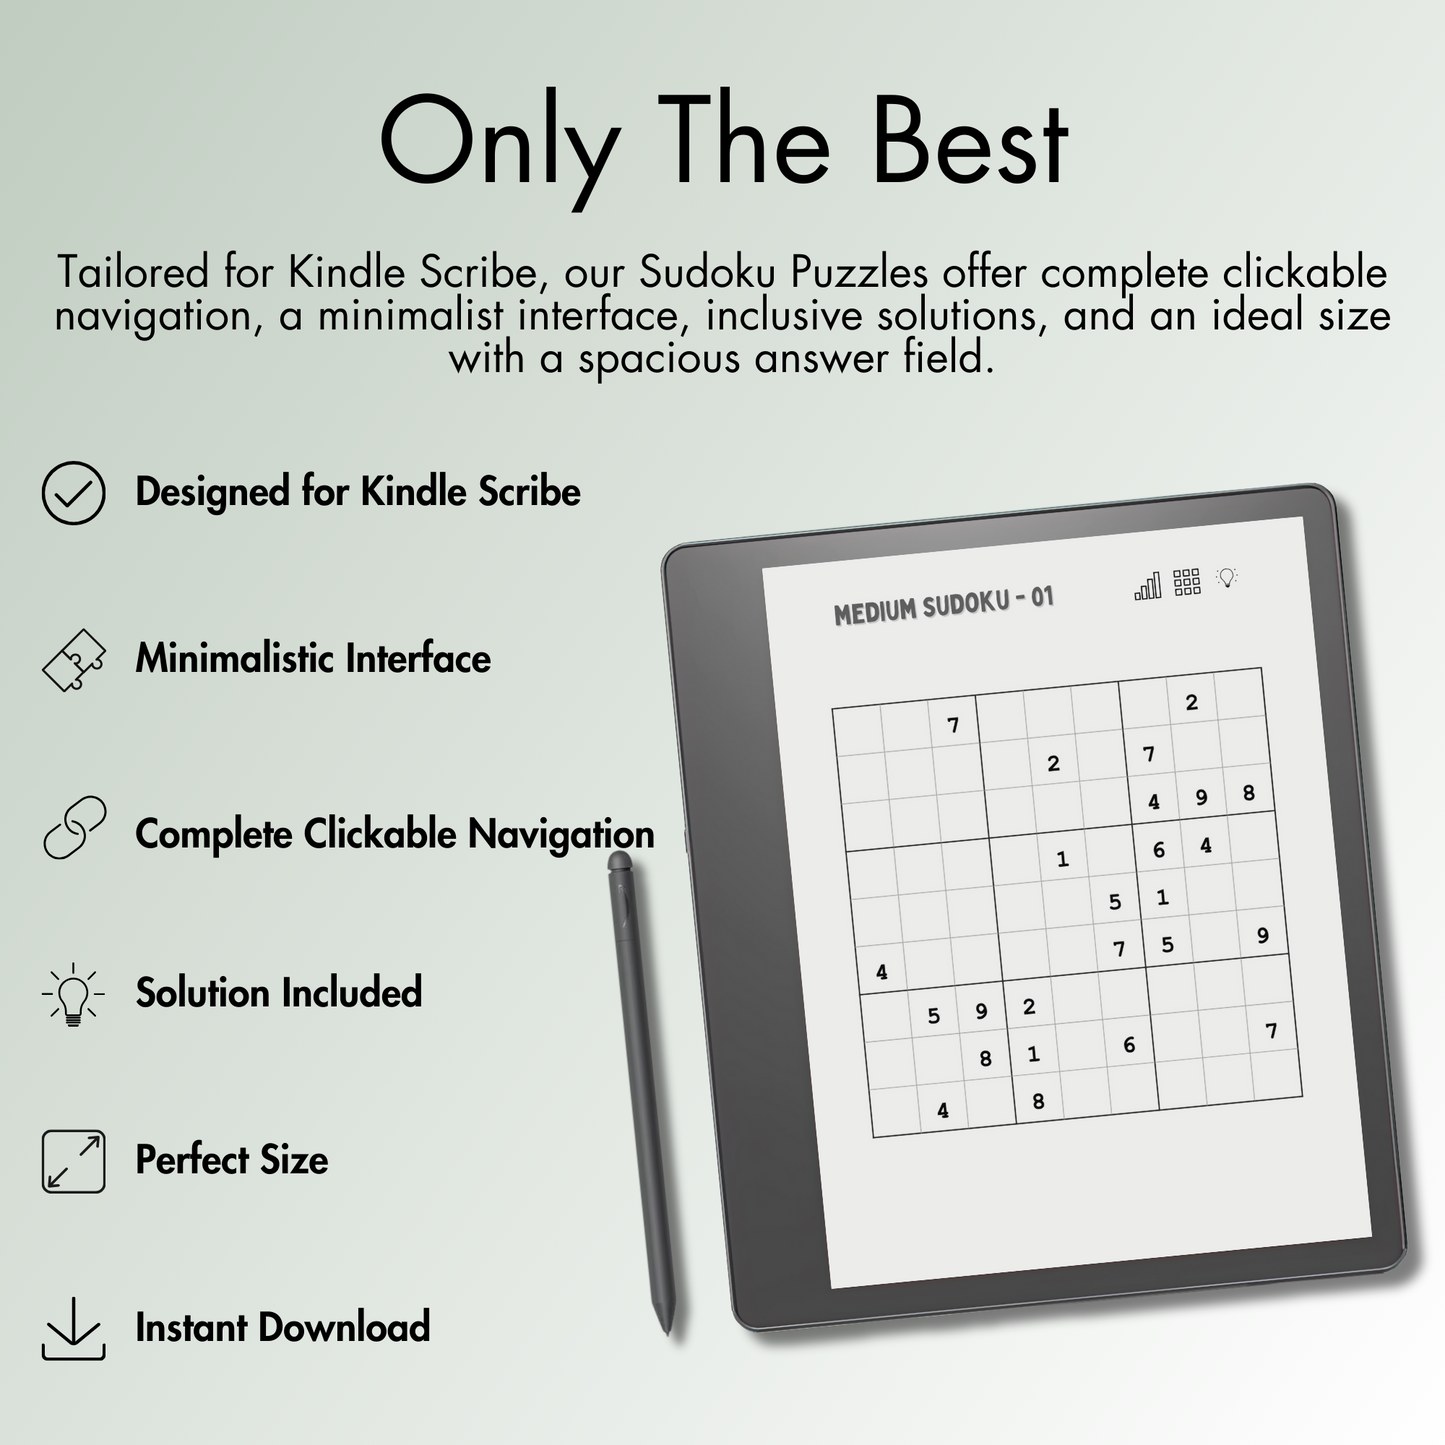 Our Sudoku Puzzles offer complete clickable navigation, a minimalist interface, inclusive solutions, and an ideal size with a spacious answer field for Kindle Scribe e-ink screen.